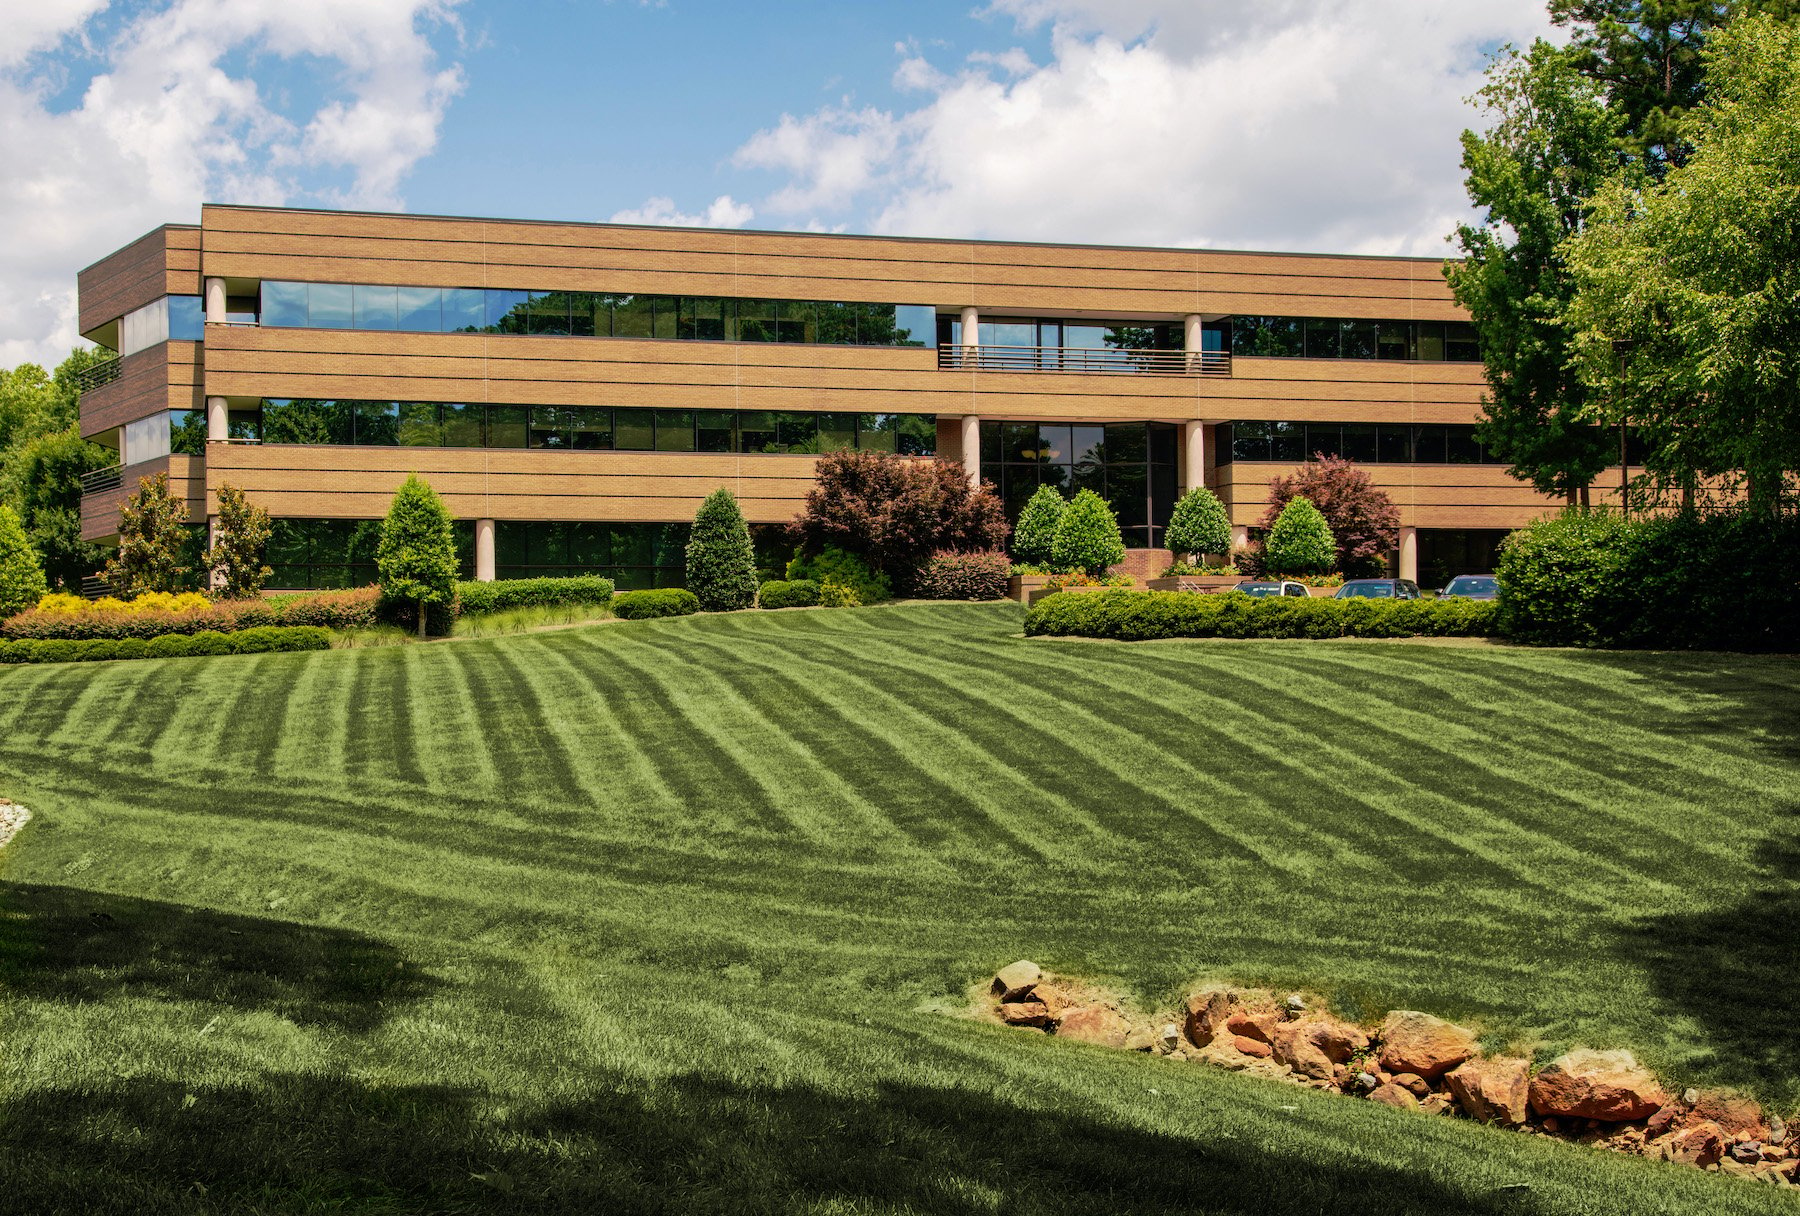 Commercial property landscaping